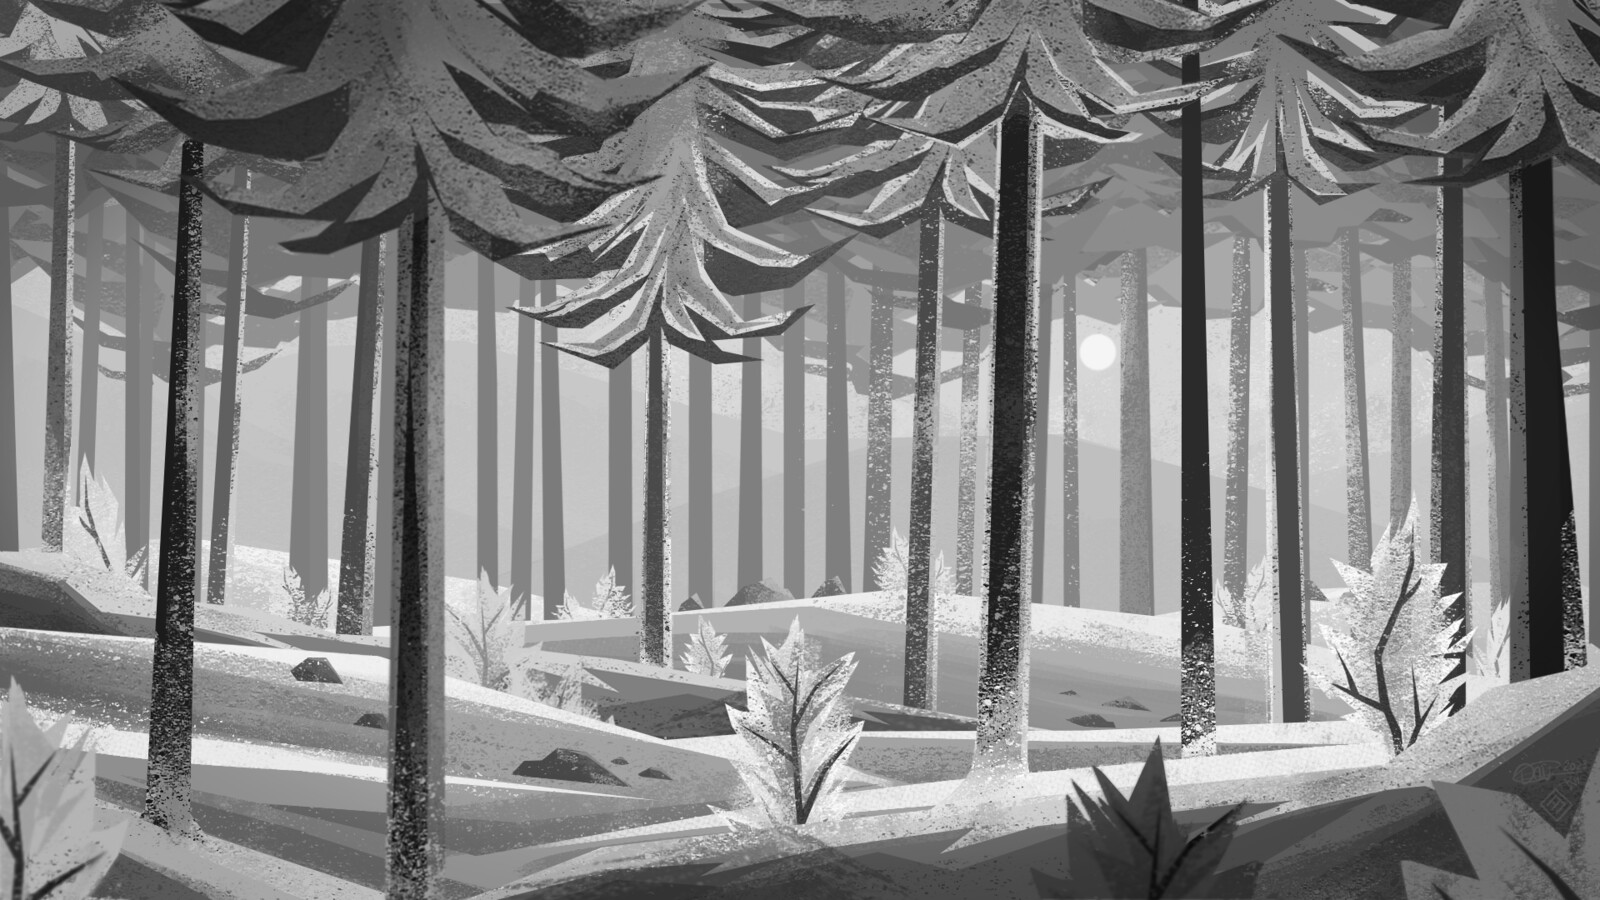 Greyscale of the environment without lighting, gradient maps and other editing.